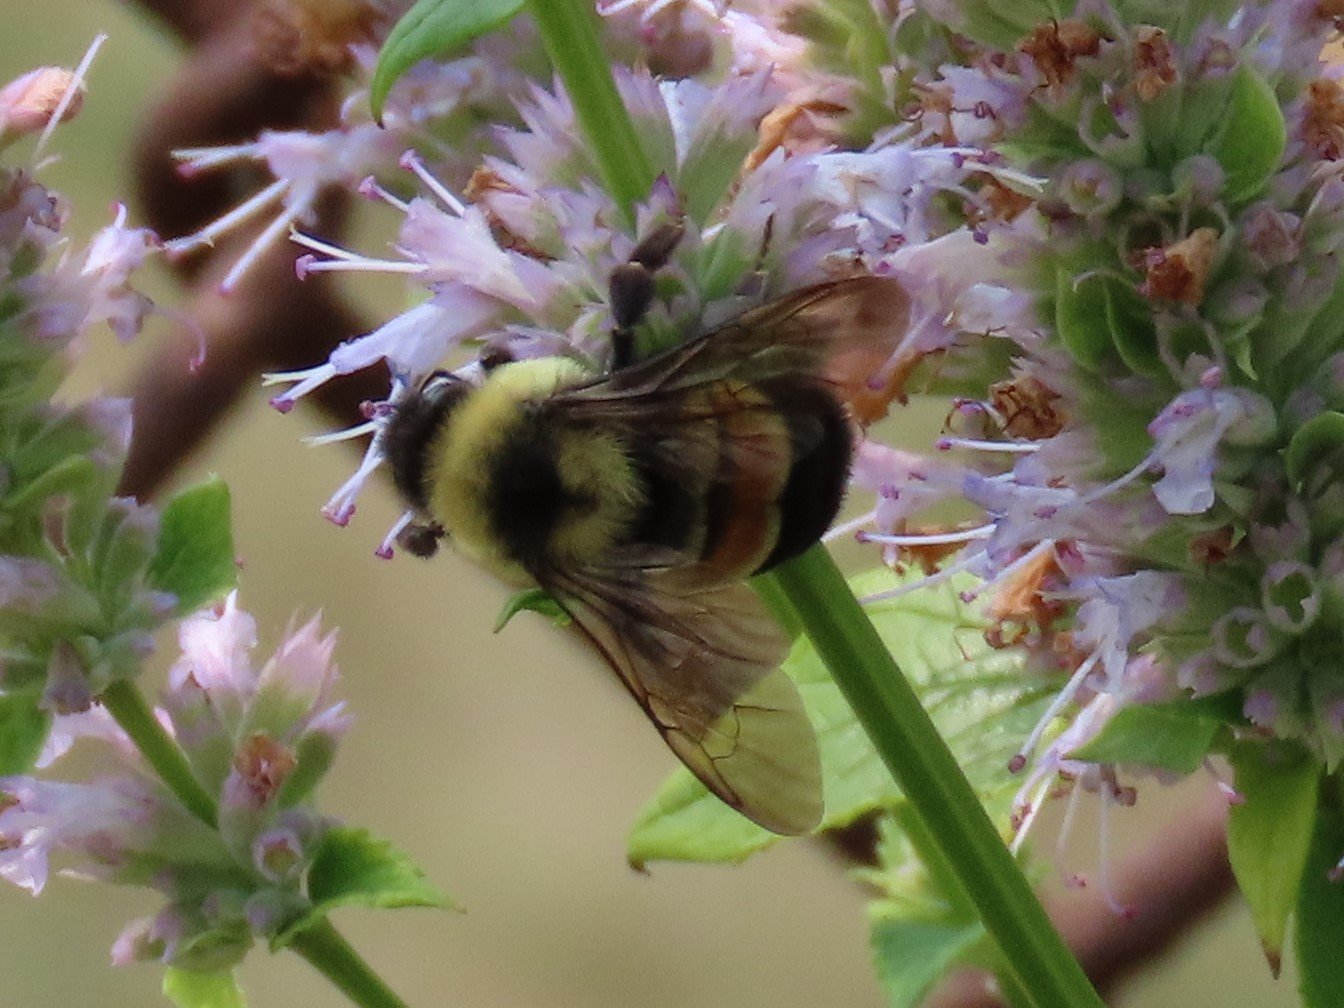 What happens when you stop mowing and start planting native flowers around the edges of West Minnehaha Recreation Center in Frogtown? The bees return, including this endangered Rusty-Patched bumblebee (Minnesota’s state bee), spotted and photographed last July. (Photo by Kathy Sidles)